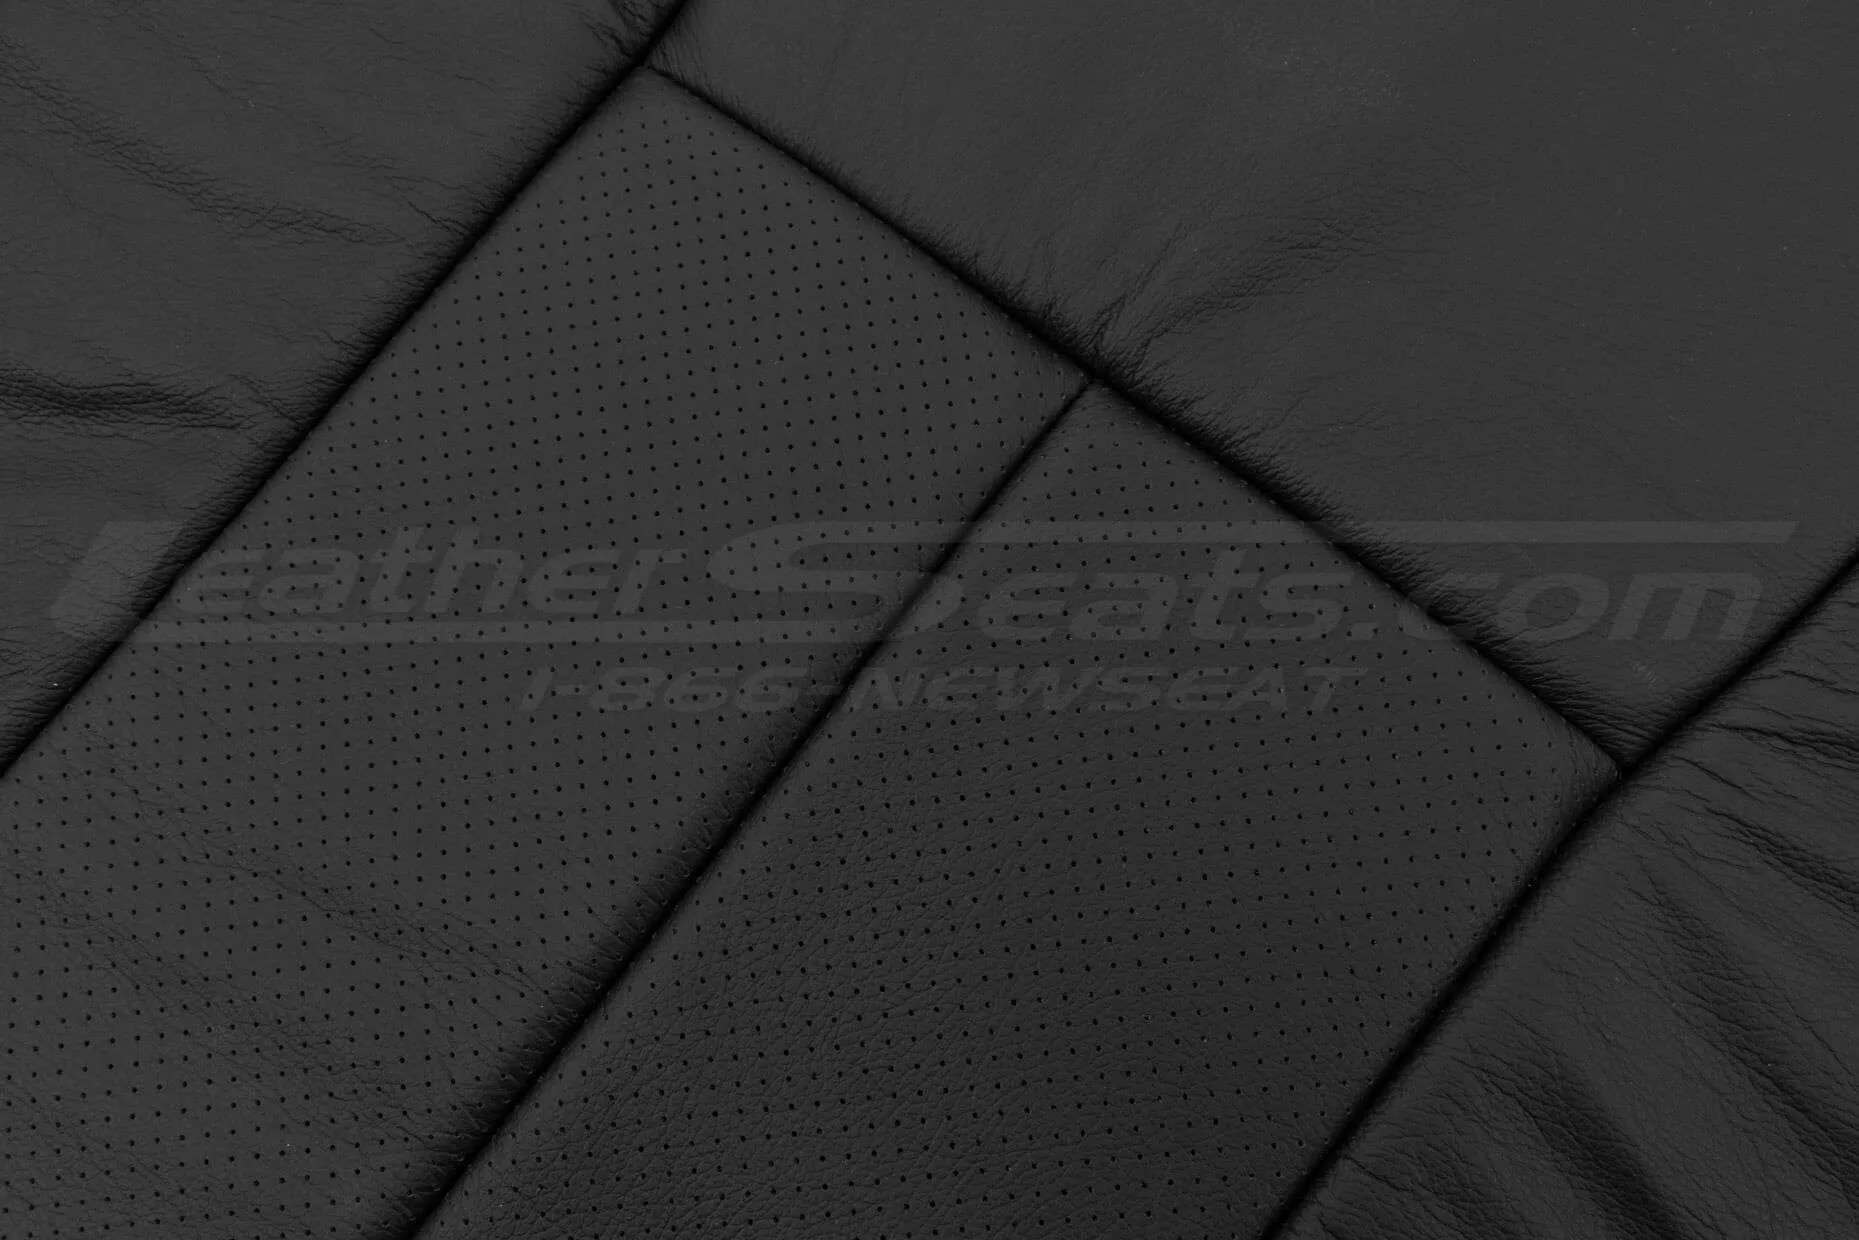 Combo perforation and leather texture close-up